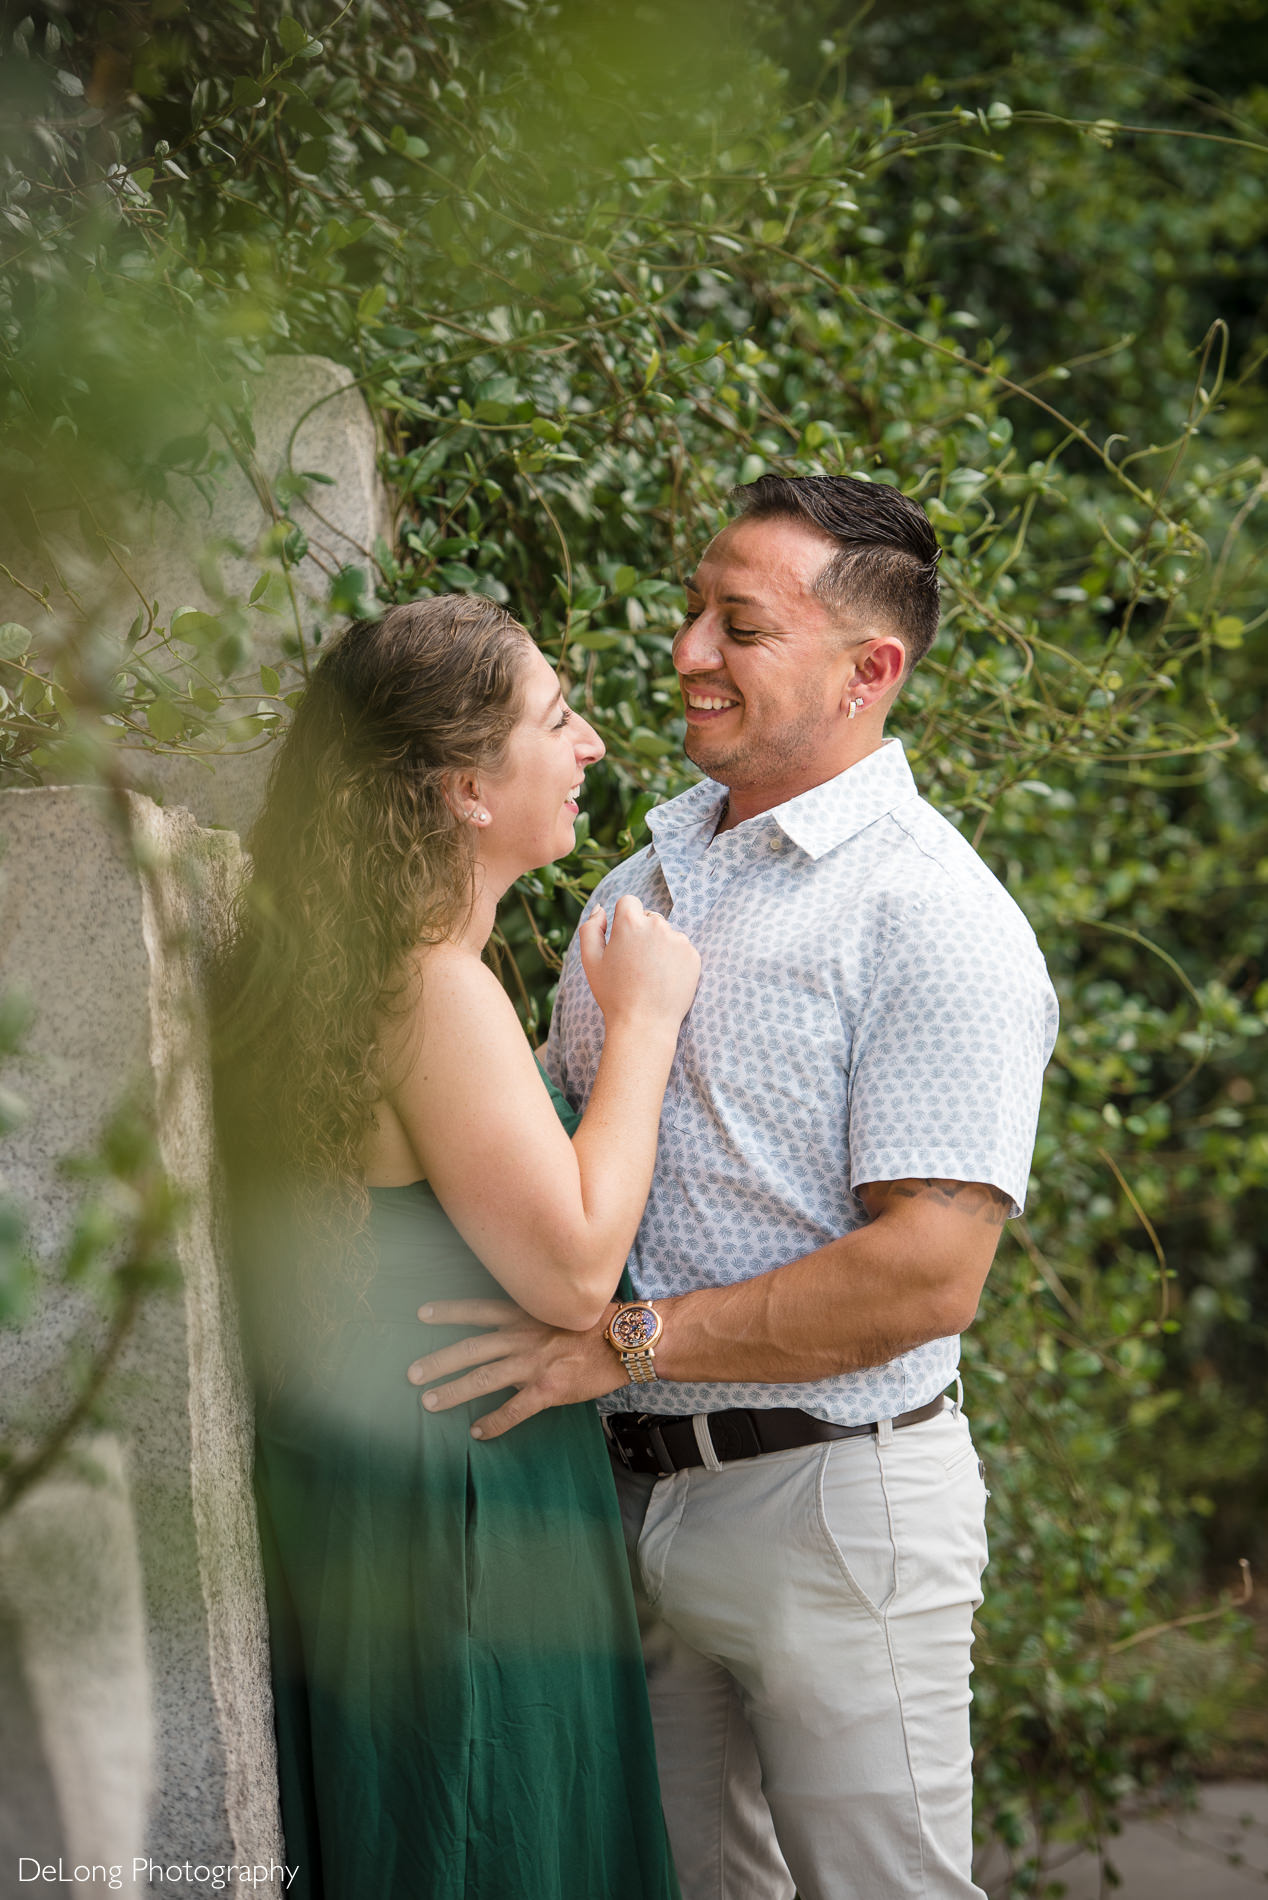 Man smiling lovingly at woman surrounded by greenery during a Romare Bearden Park engagement session by Charlotte wedding photographers DeLong Photography